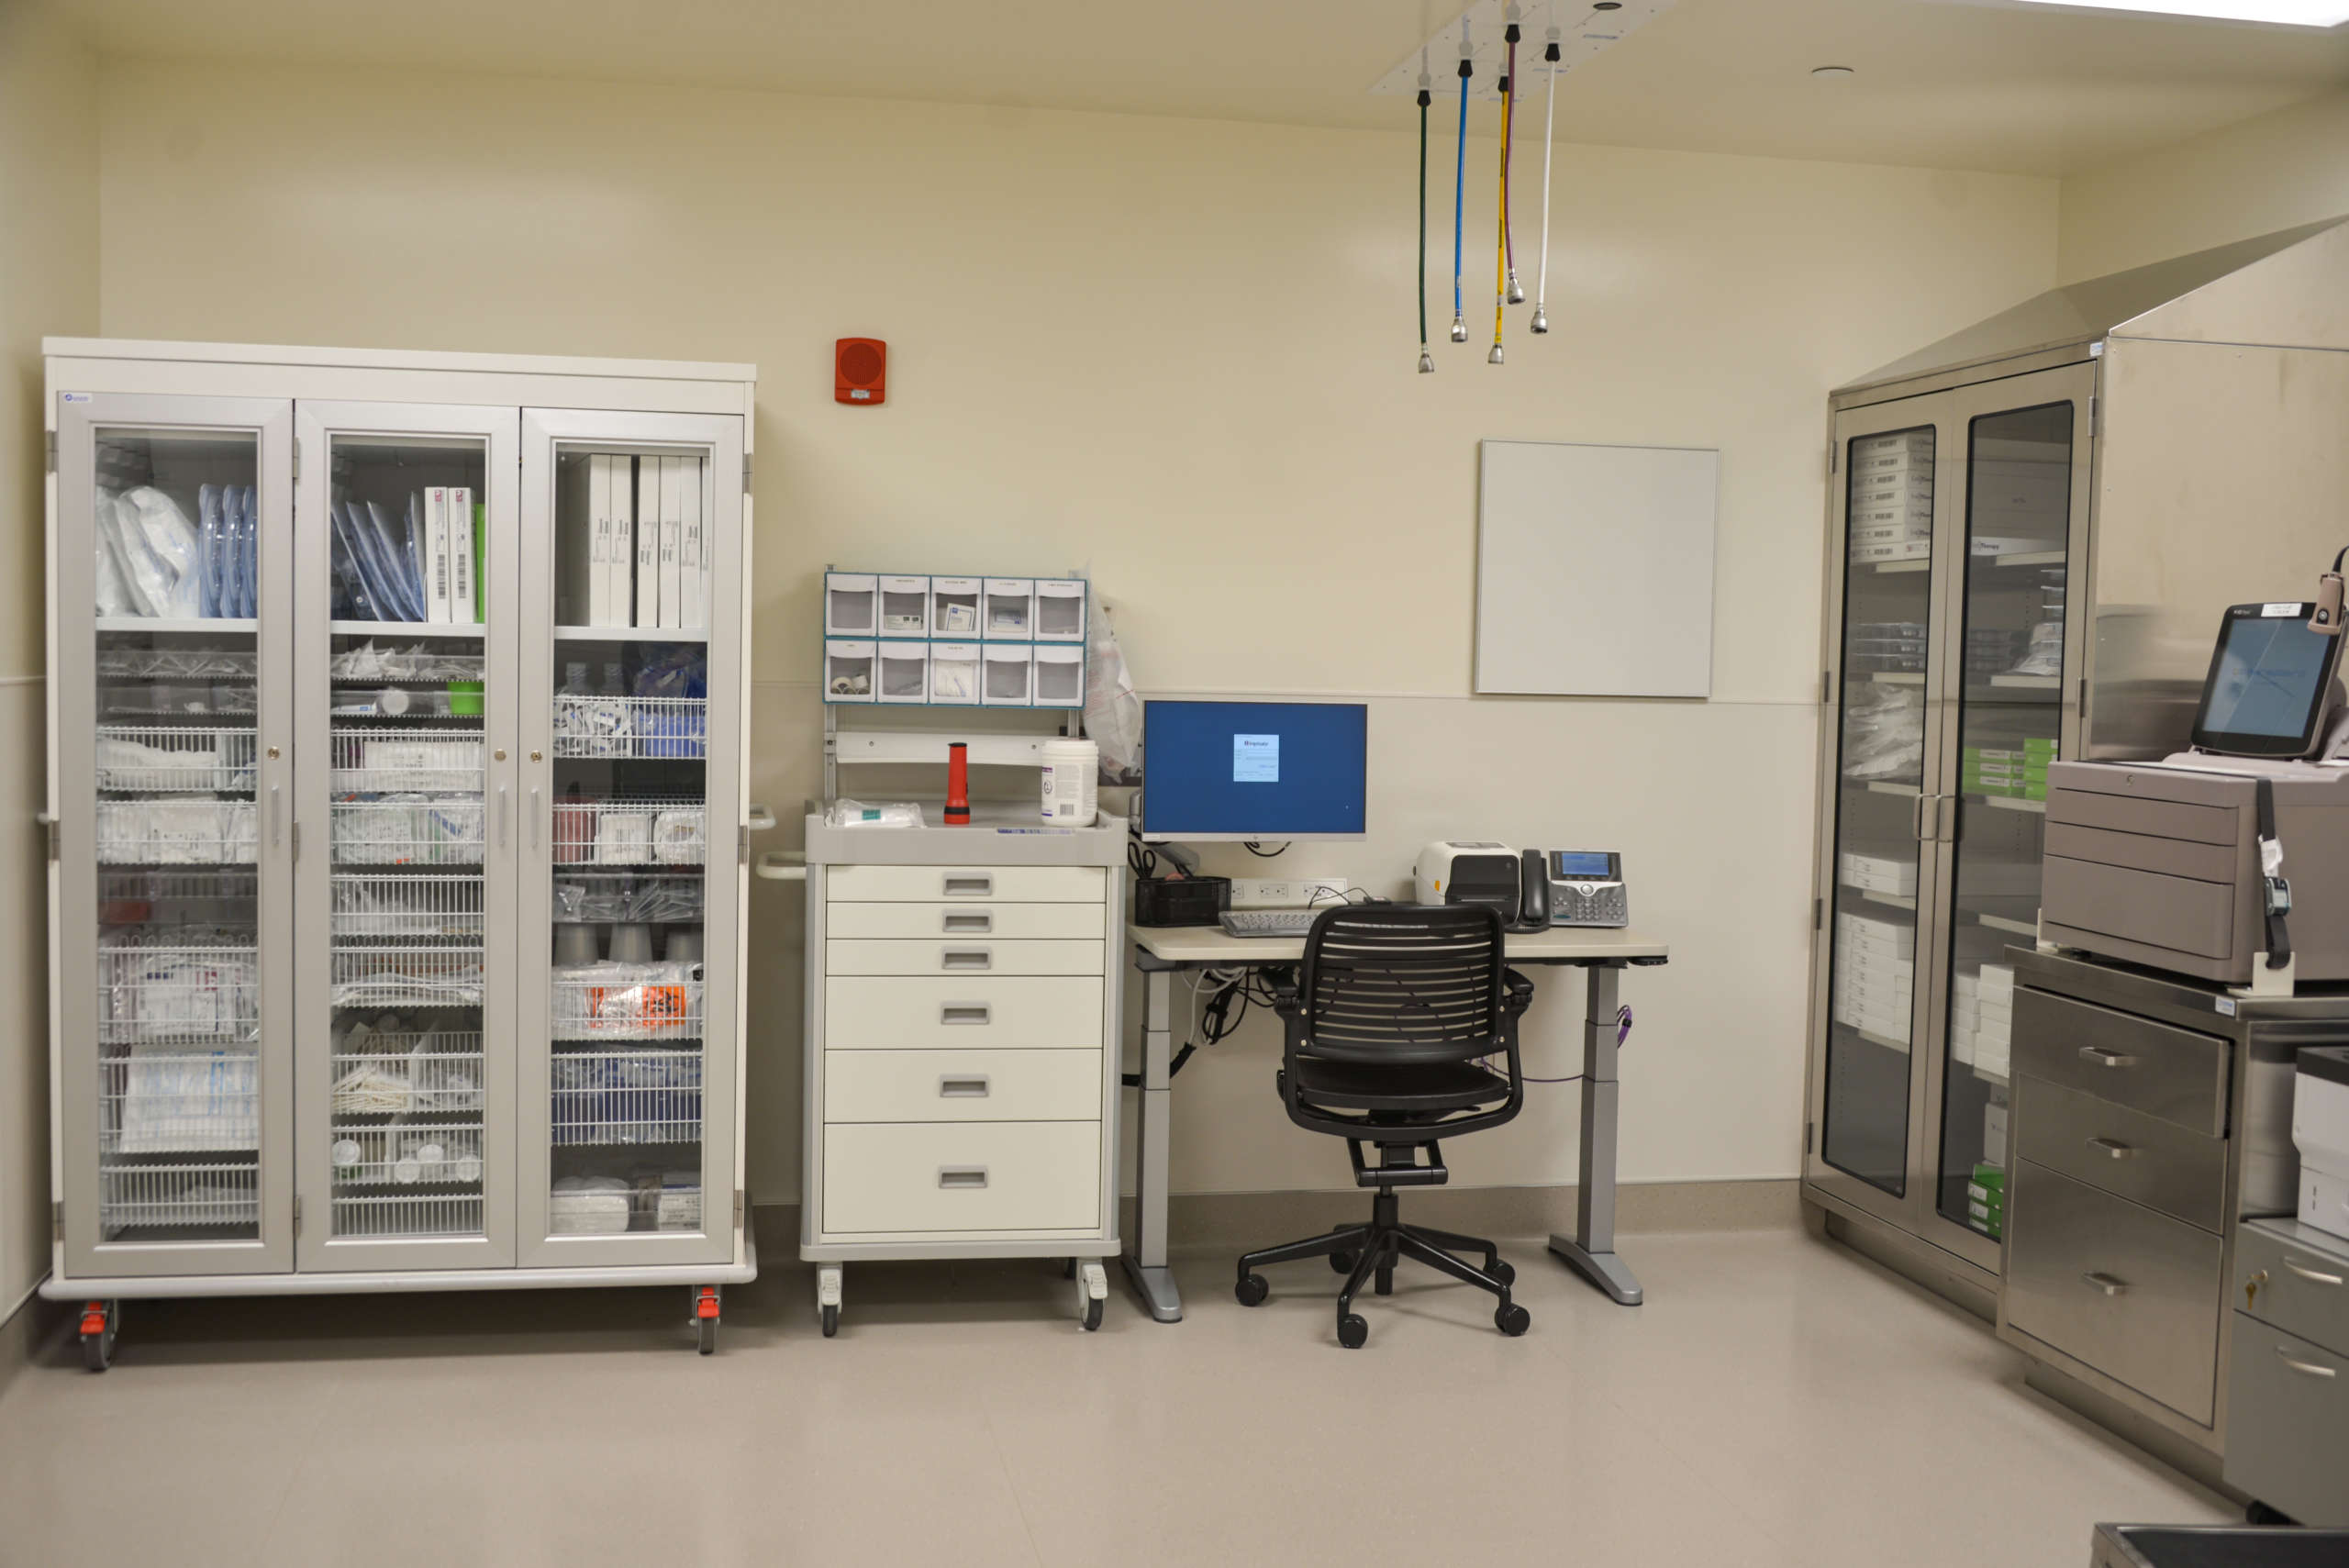 Medical equipment installed and stored in a room with a desk at the UC Davis Health Pulmonary & GI Remodel